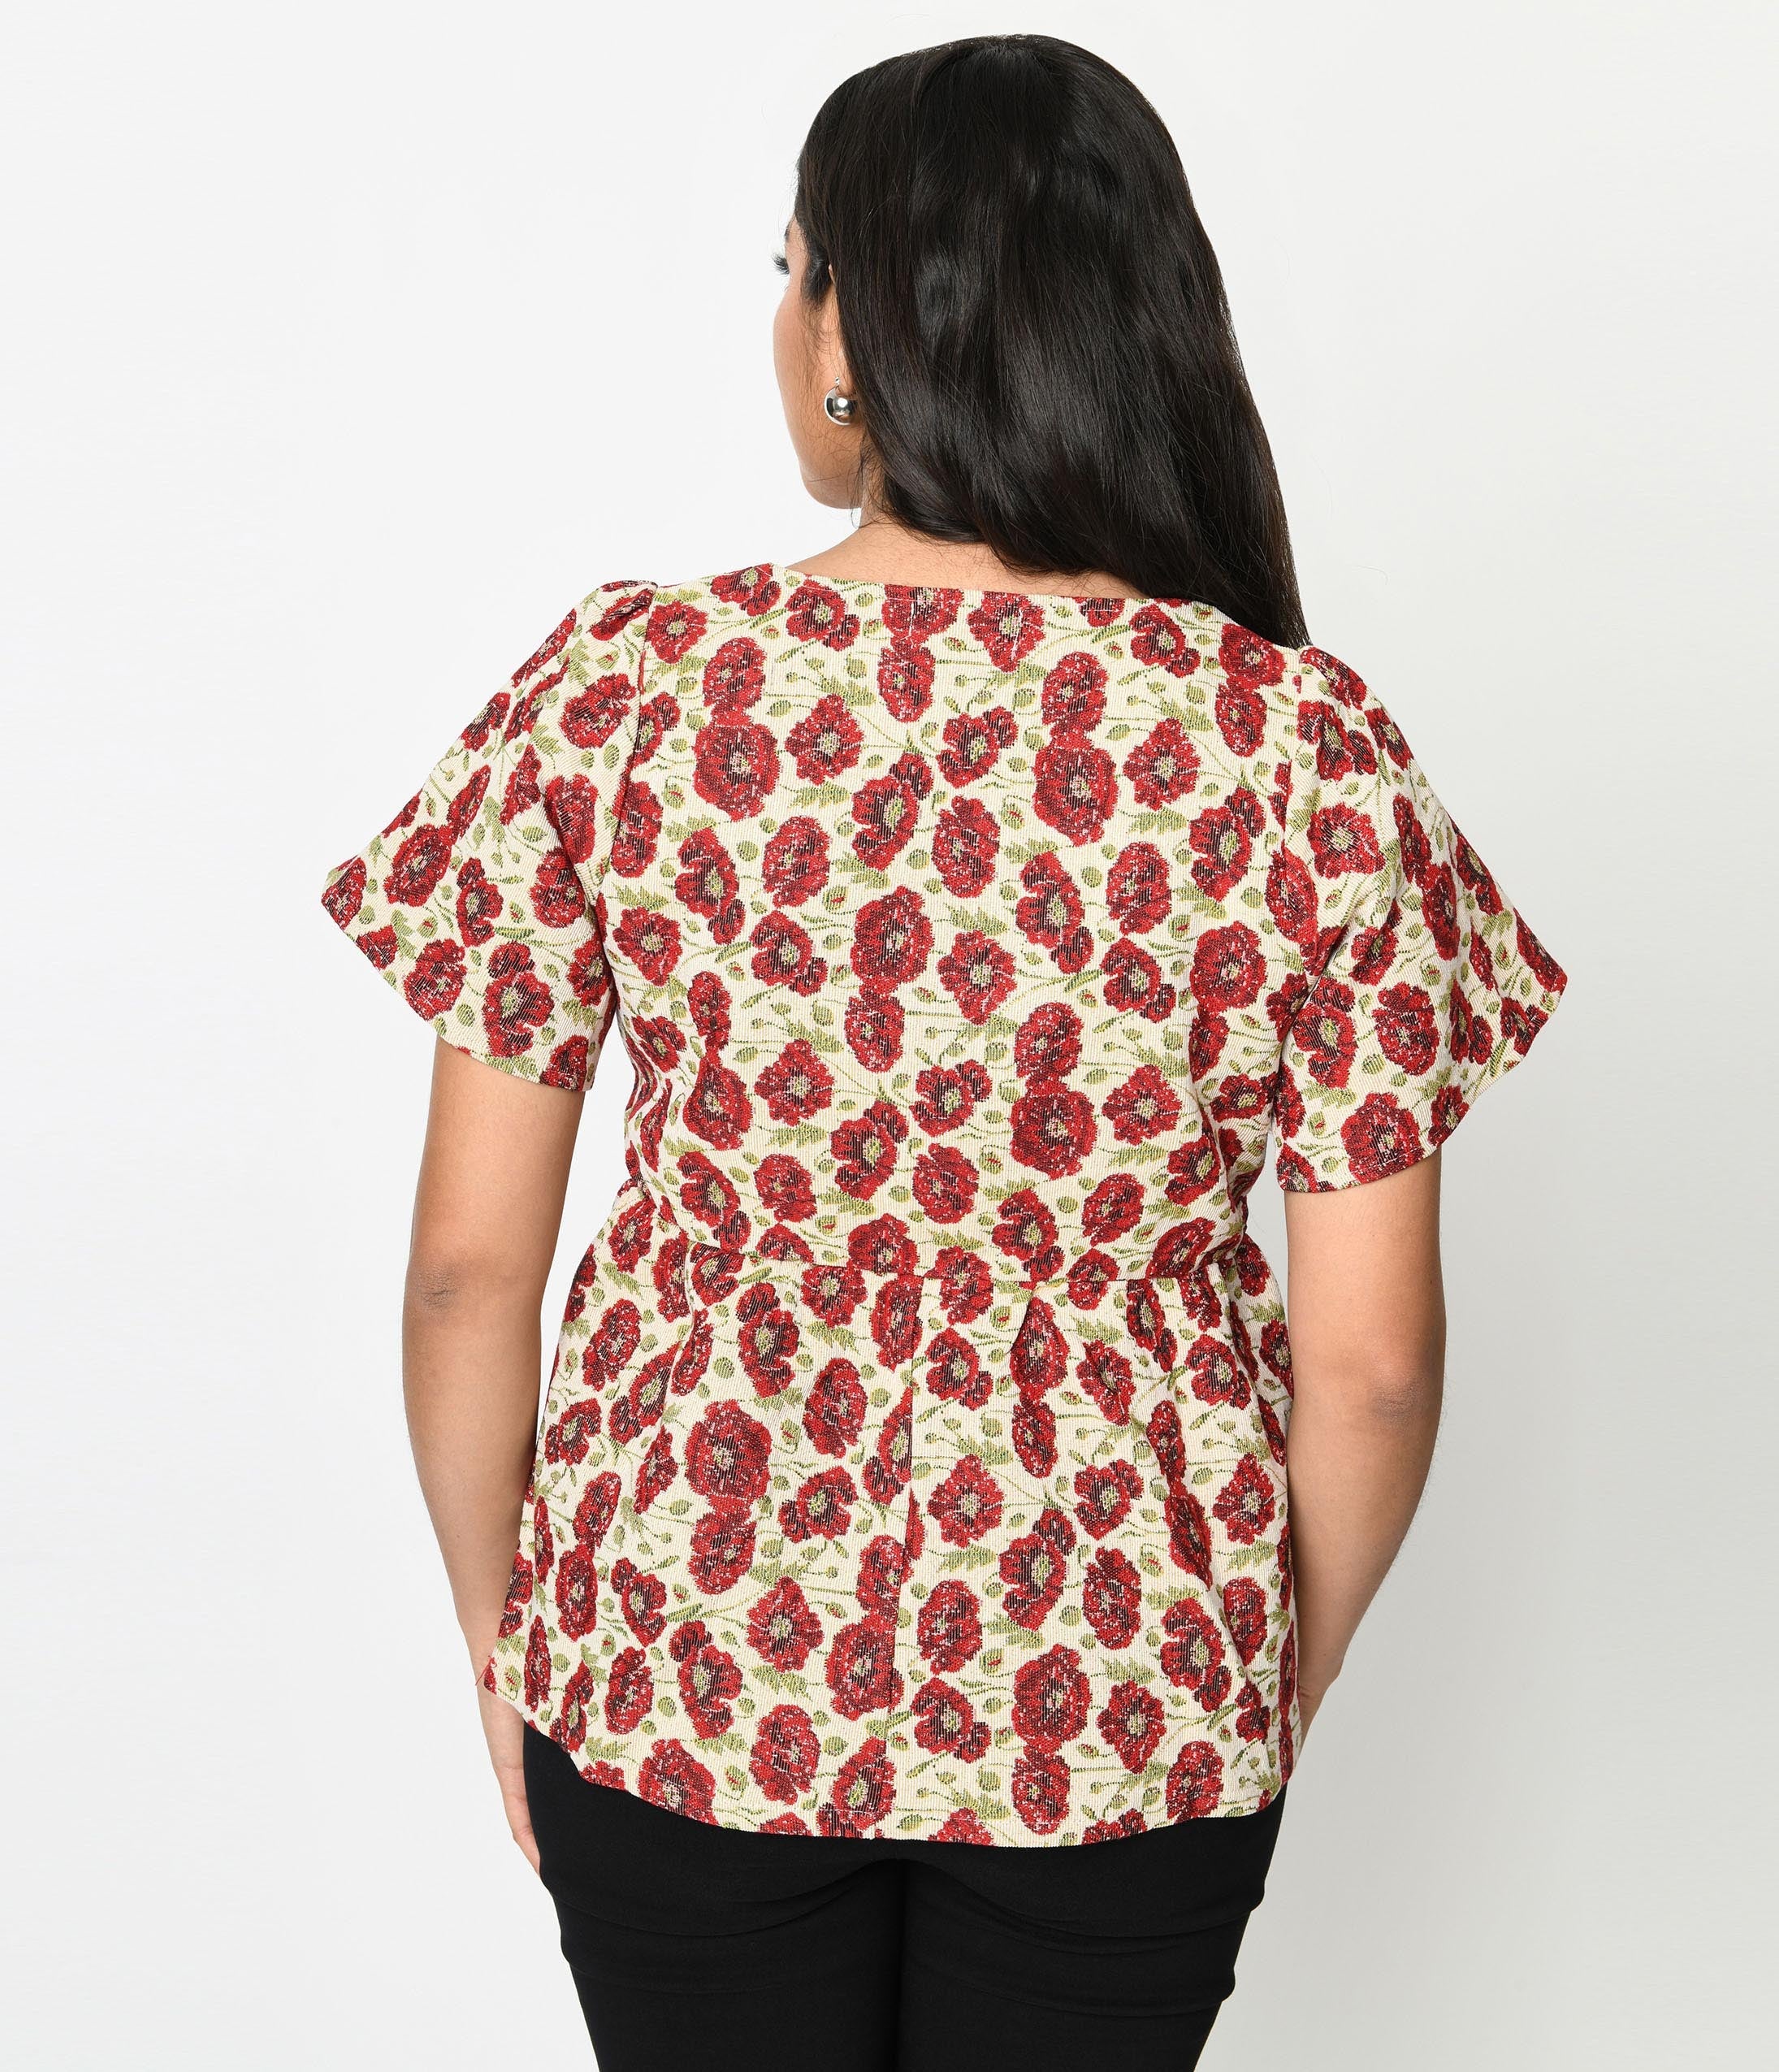 Ivory & Red Floral Kiss Jacquard Peplum Top